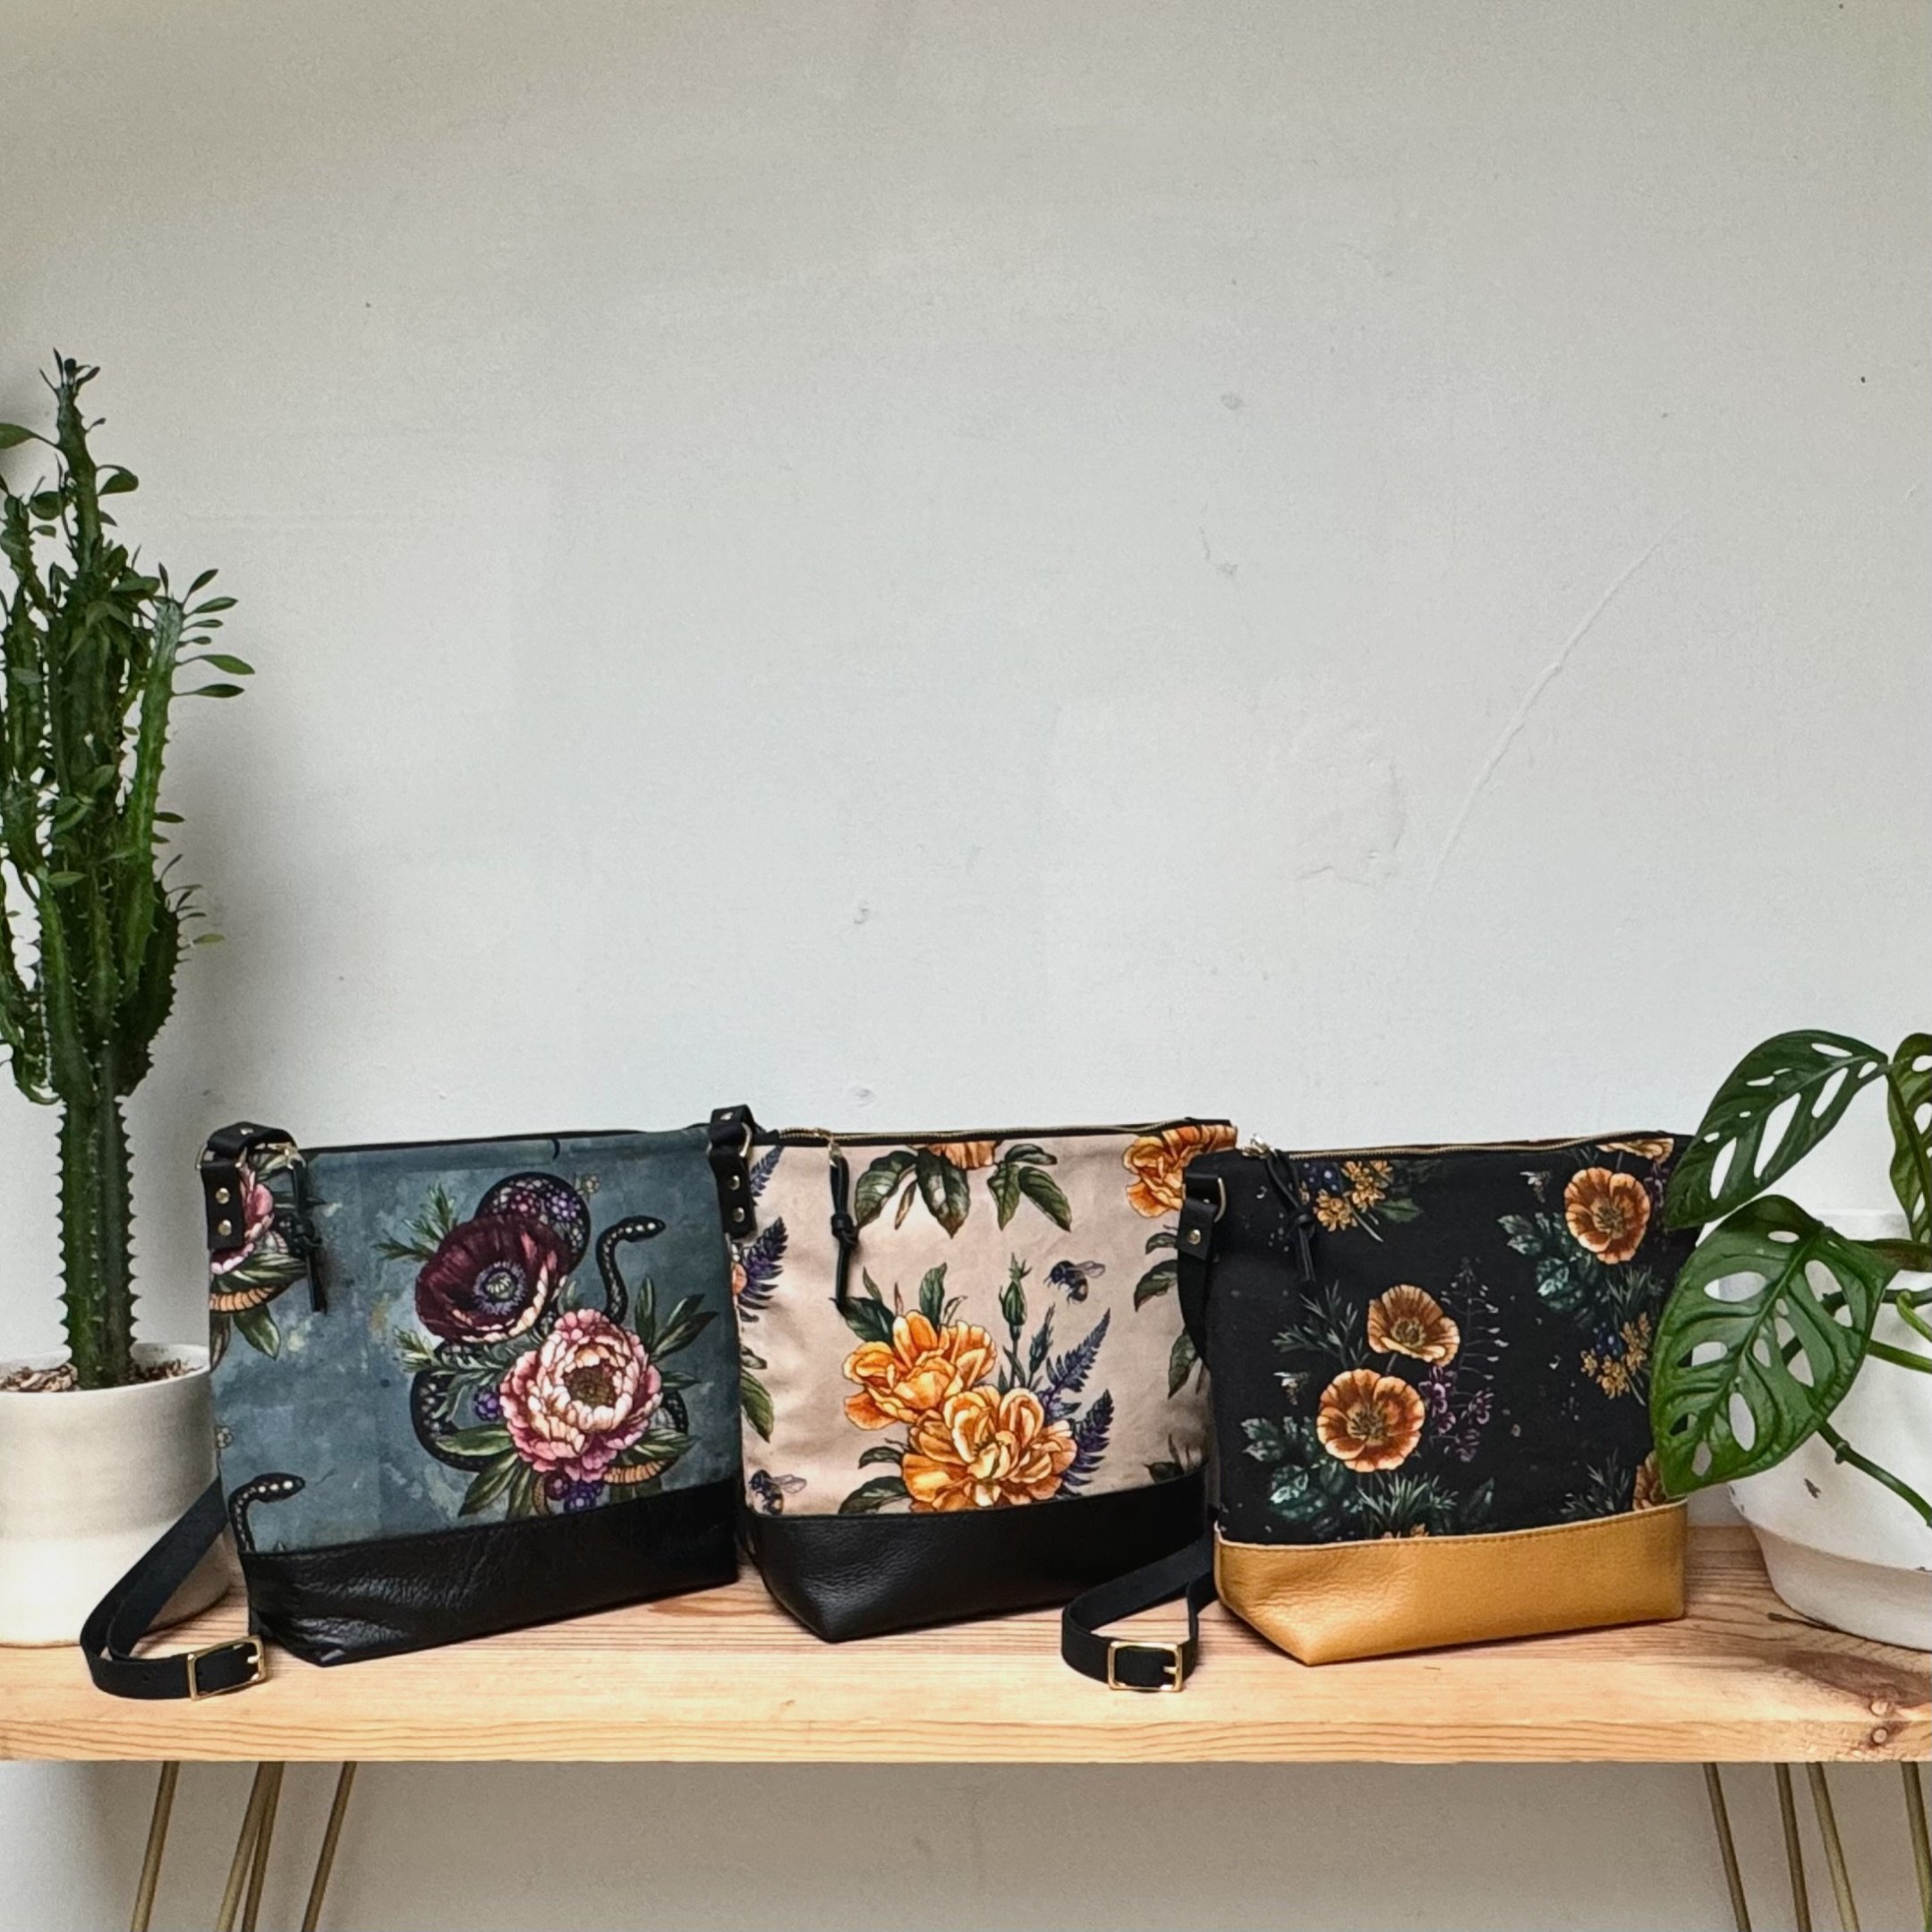 Finally! Our new bag style is here, the Coco Crossbody. Looking fabulous in the latest, gorgeous prints designed by @alicestattoos 💛 Yellow Rose with Fern &amp; Bee 🐝  Snake with Peony, Poppy and Berries 🫐 California Poppy with Alaskan Fireweed, O